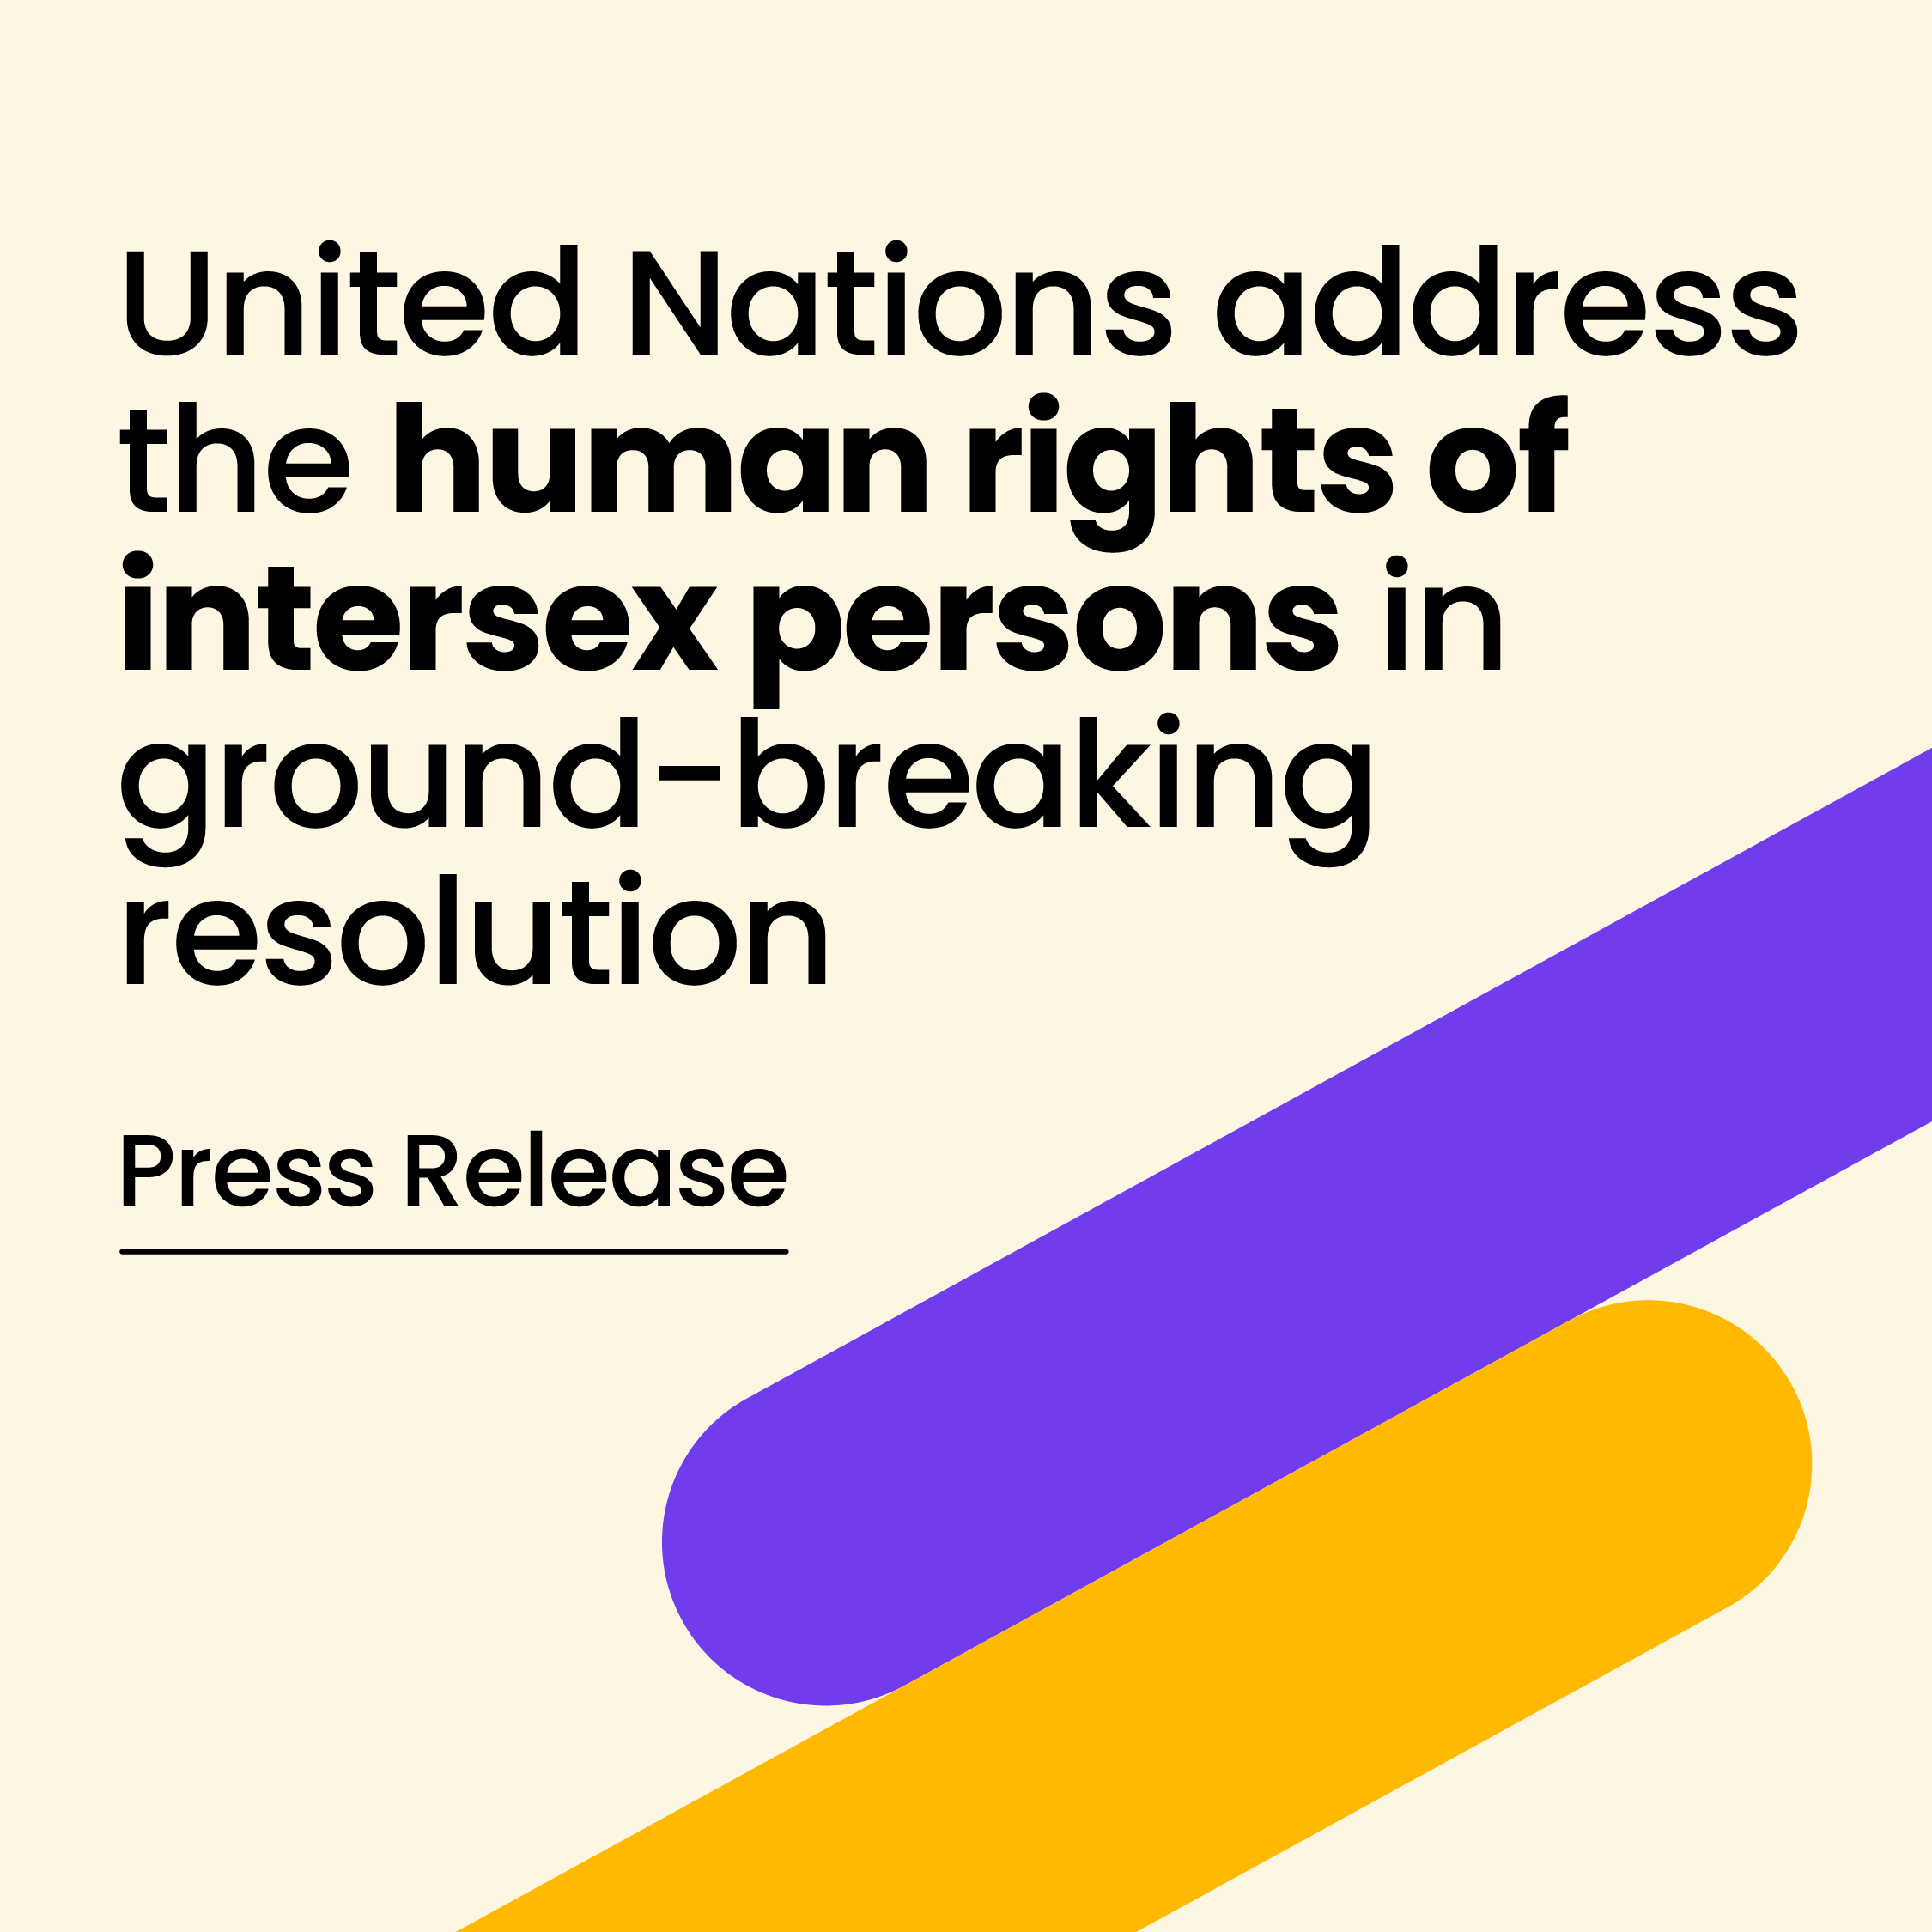 United Nations addresses the human rights of intersex persons in ground-breaking resolution